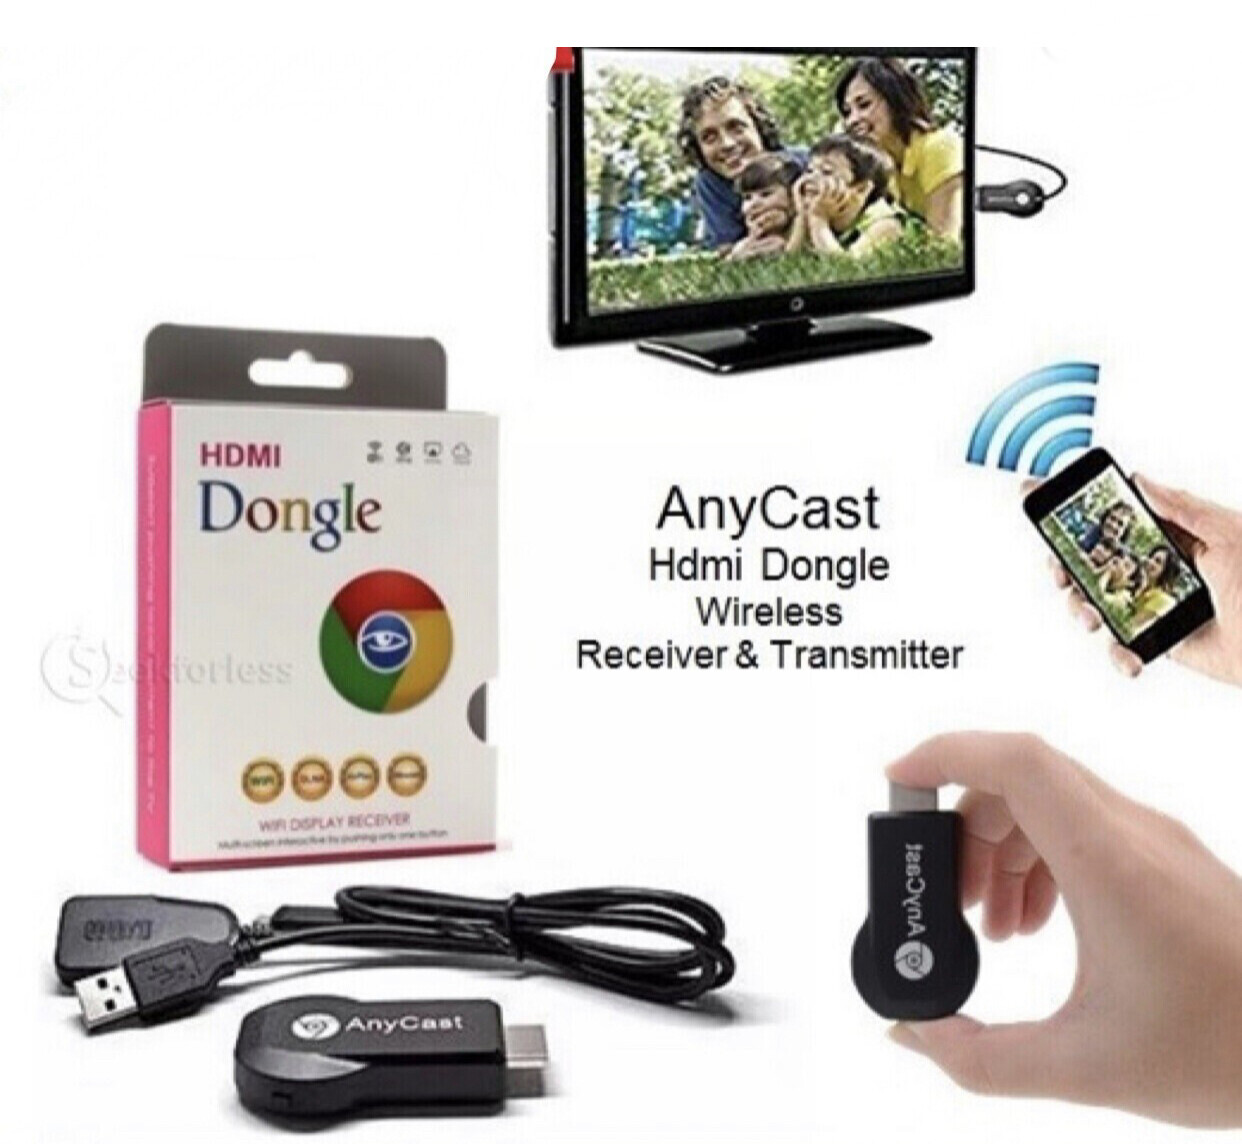 Anycast HDMI Dongle